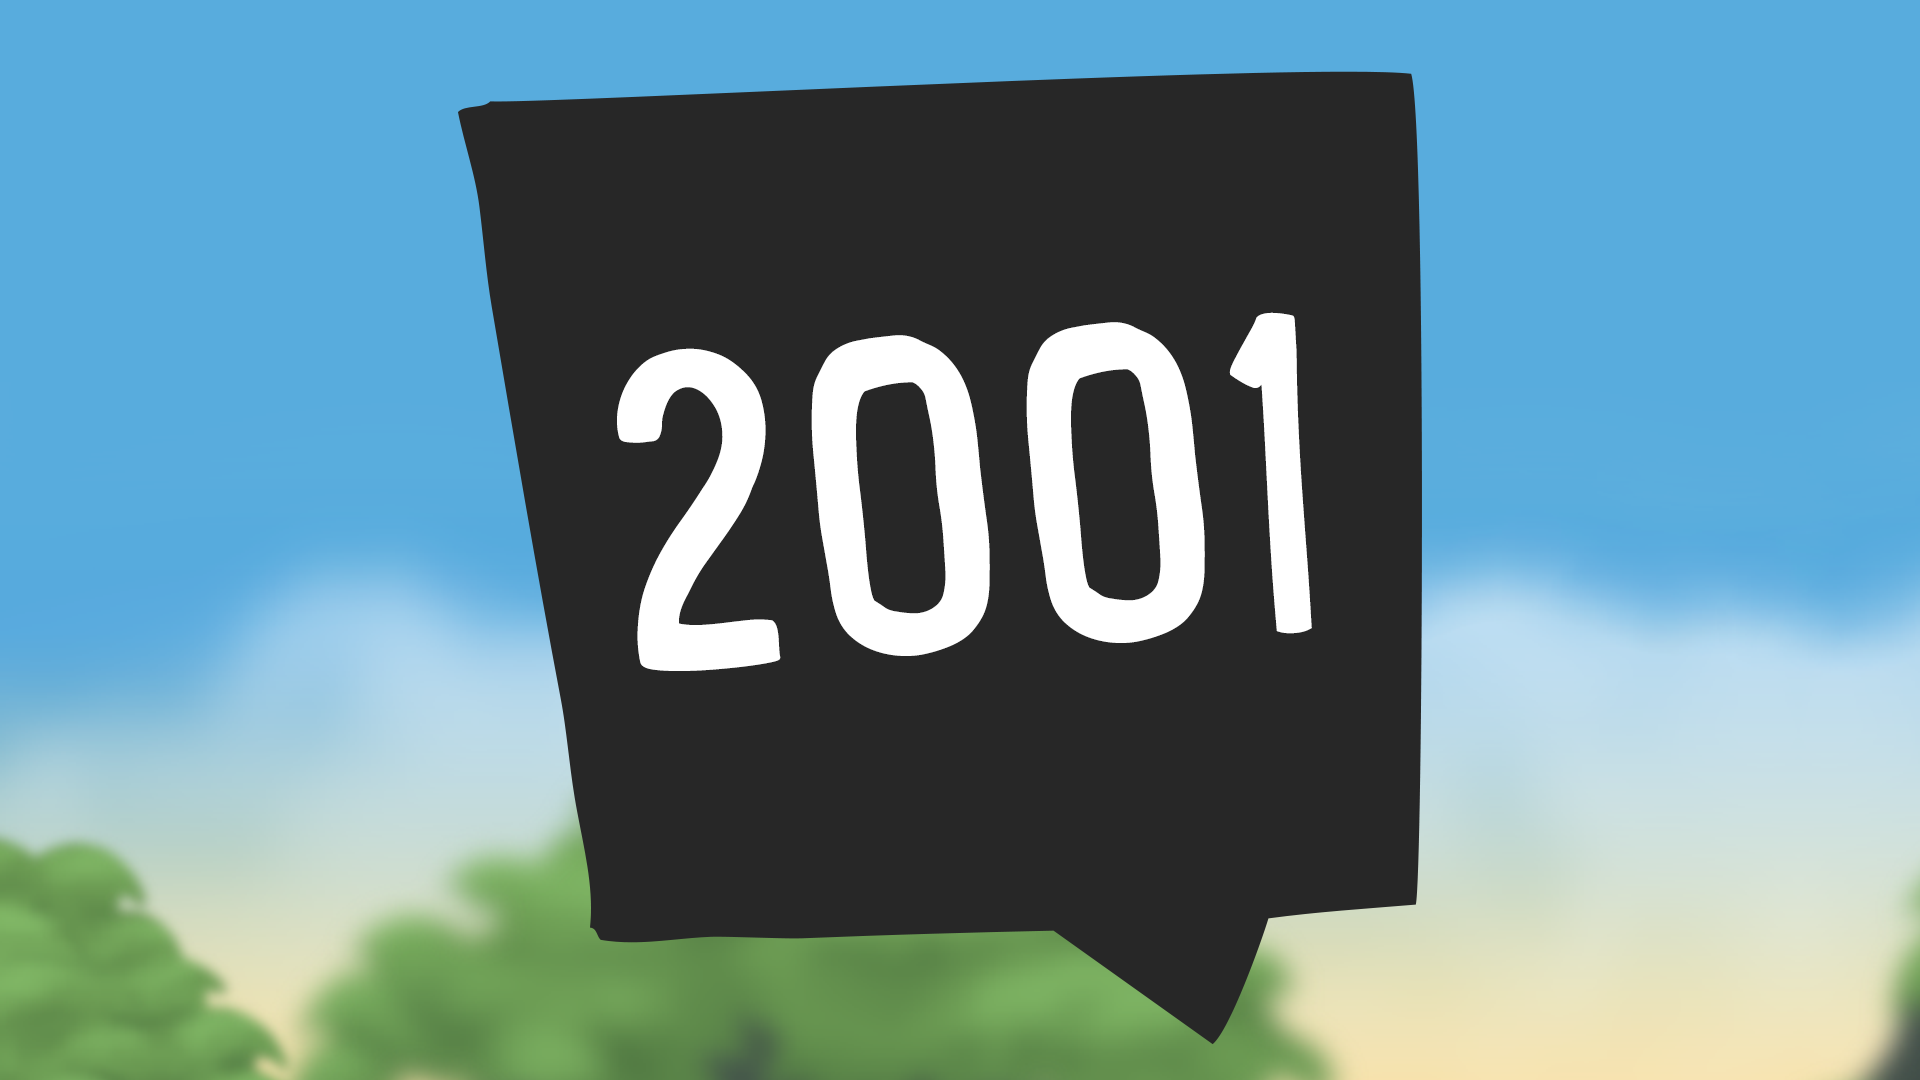 Icon for 2001